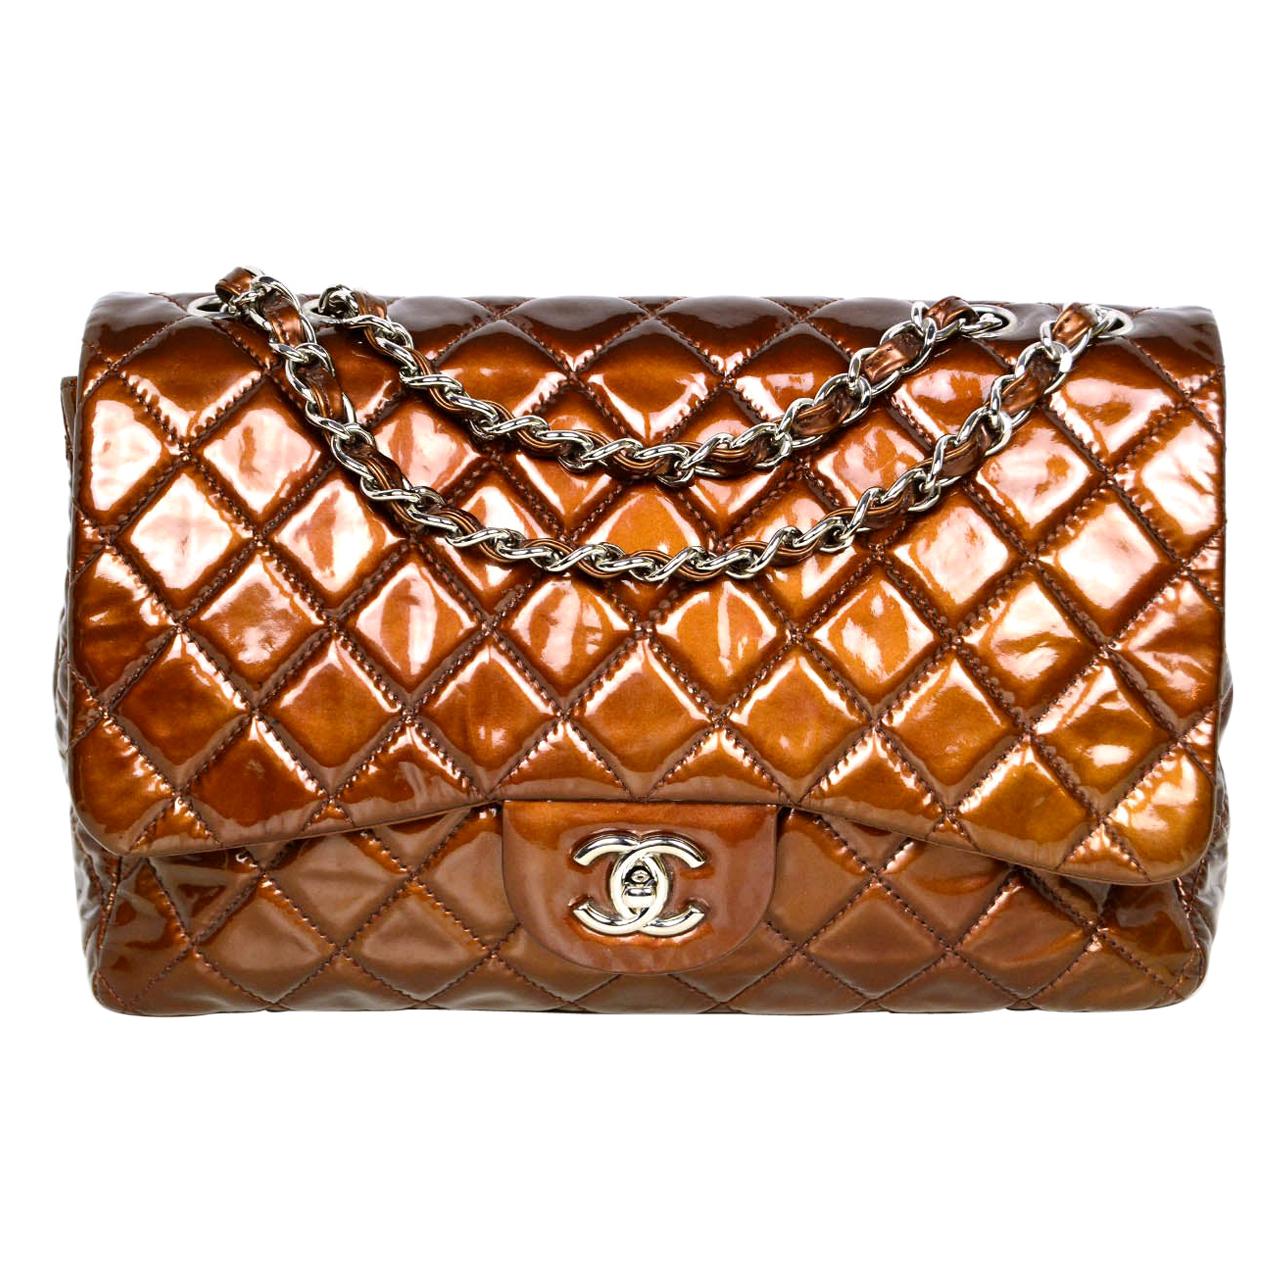 Chanel Bronze Patent Leather Quilted Single Flap Jumbo Classic Bag